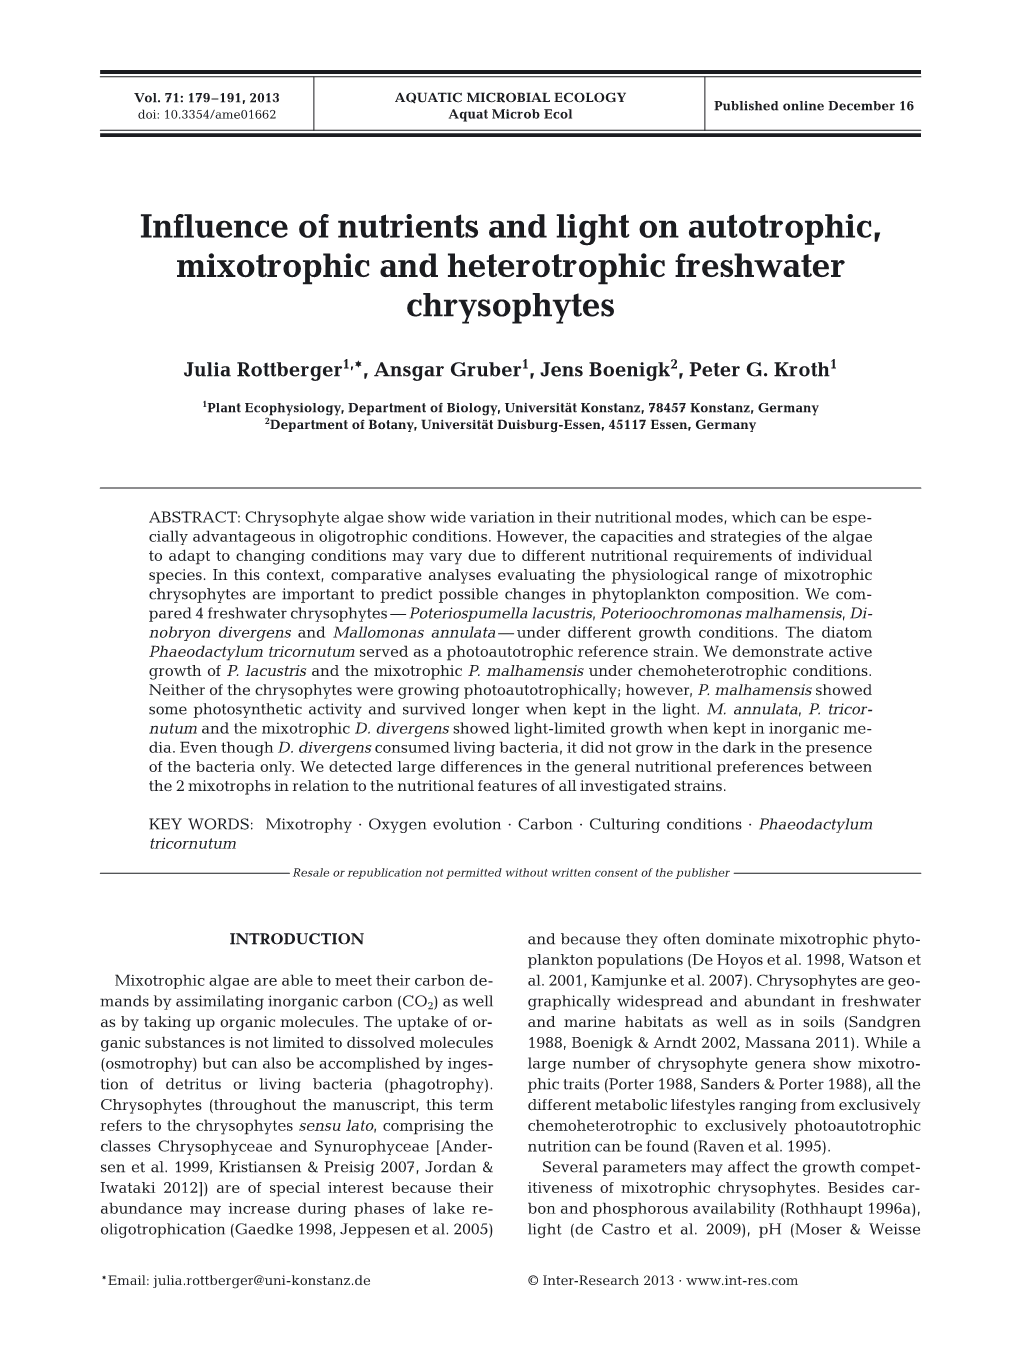 Influence of Nutrients and Light on Autotrophic, Mixotrophic and Heterotrophic Freshwater Chrysophytes